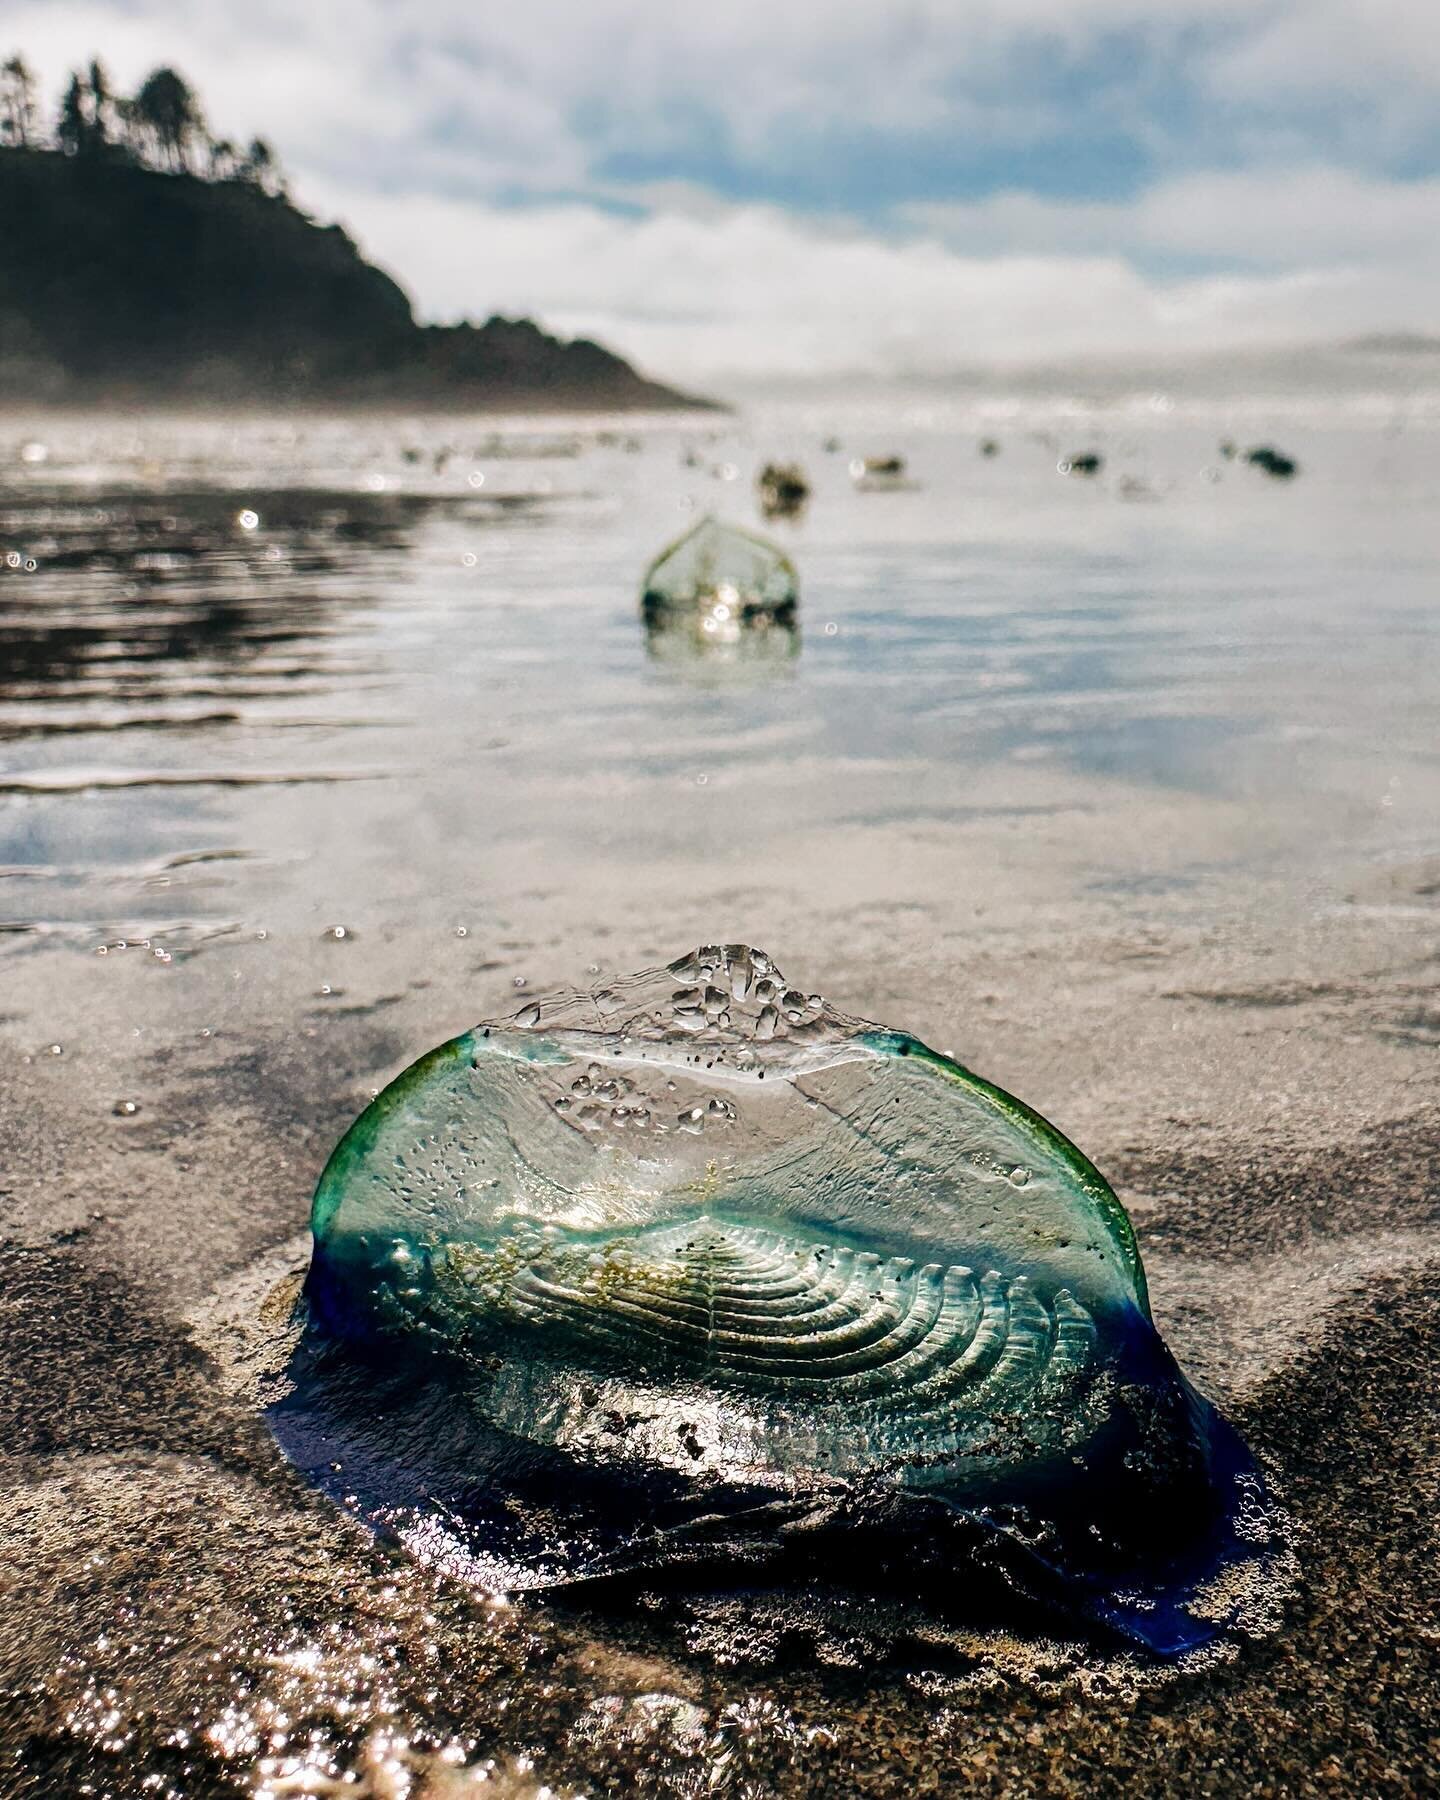 We&rsquo;re spending some time on the Washington coast this week and came across thousands of these fascinating organisms on the beach yesterday. 

They&rsquo;re actually super cool jellyfish-adjacent creatures called velella velella or by-the-wind s